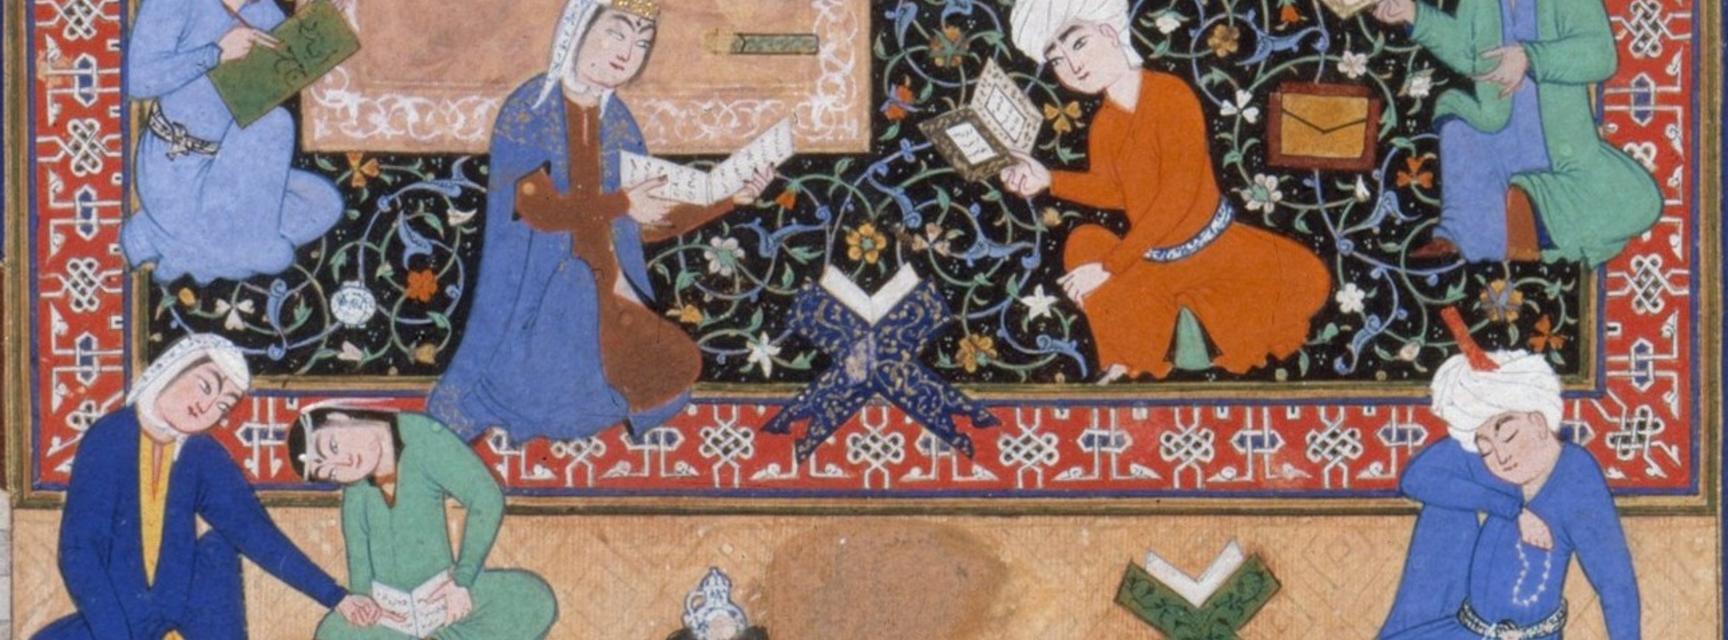 laila and majnun in school dt232547 detail